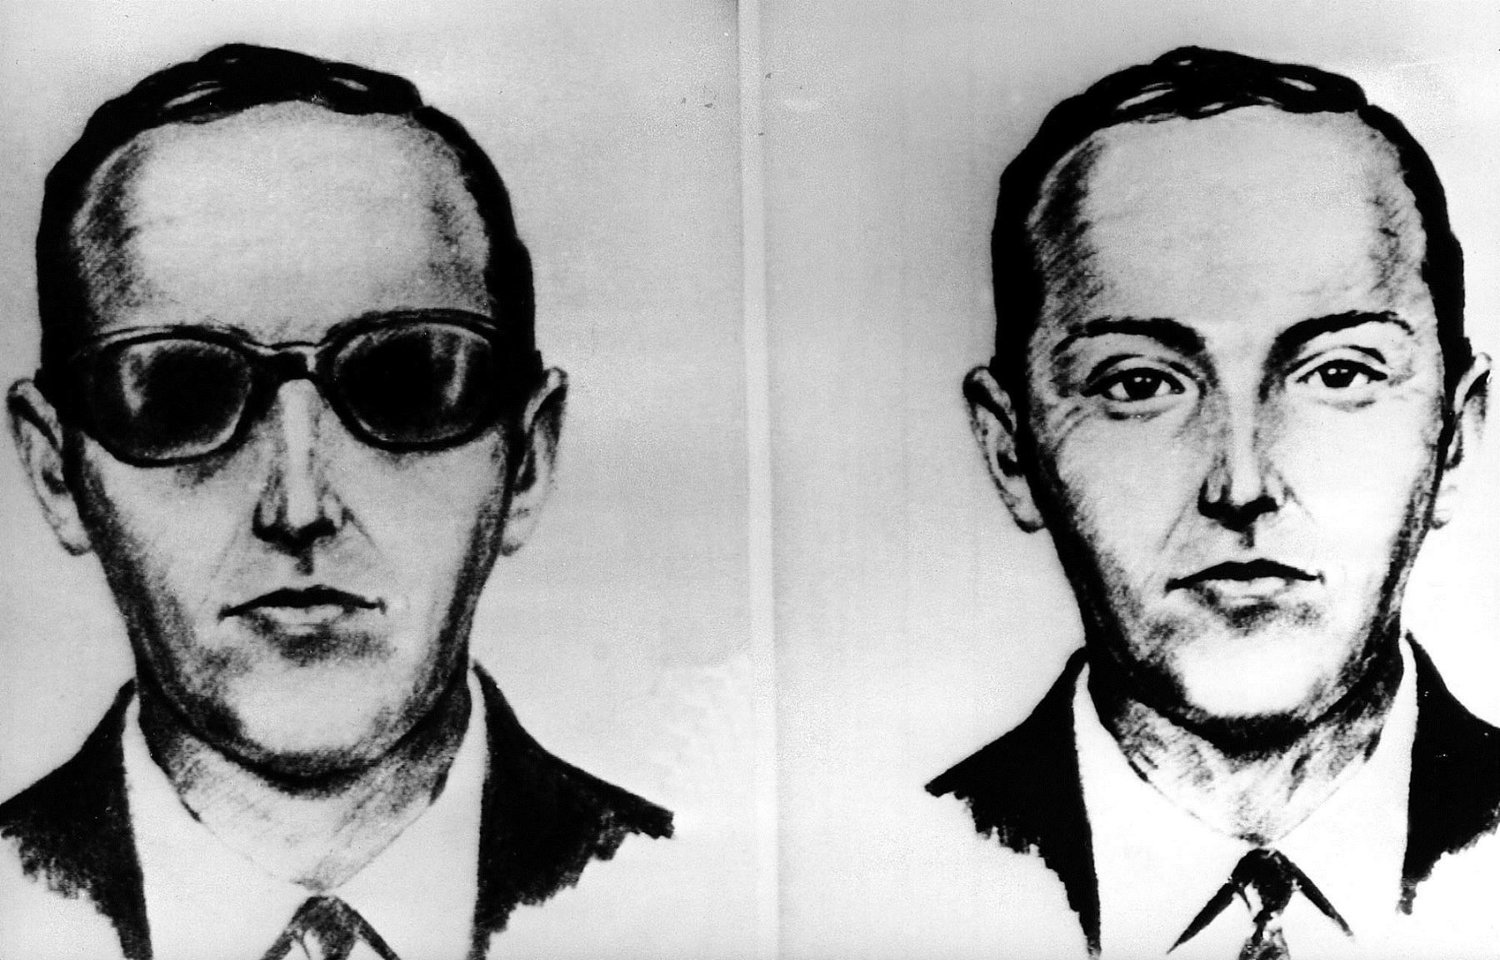 Sketch of suspect known as D.B. Cooper.